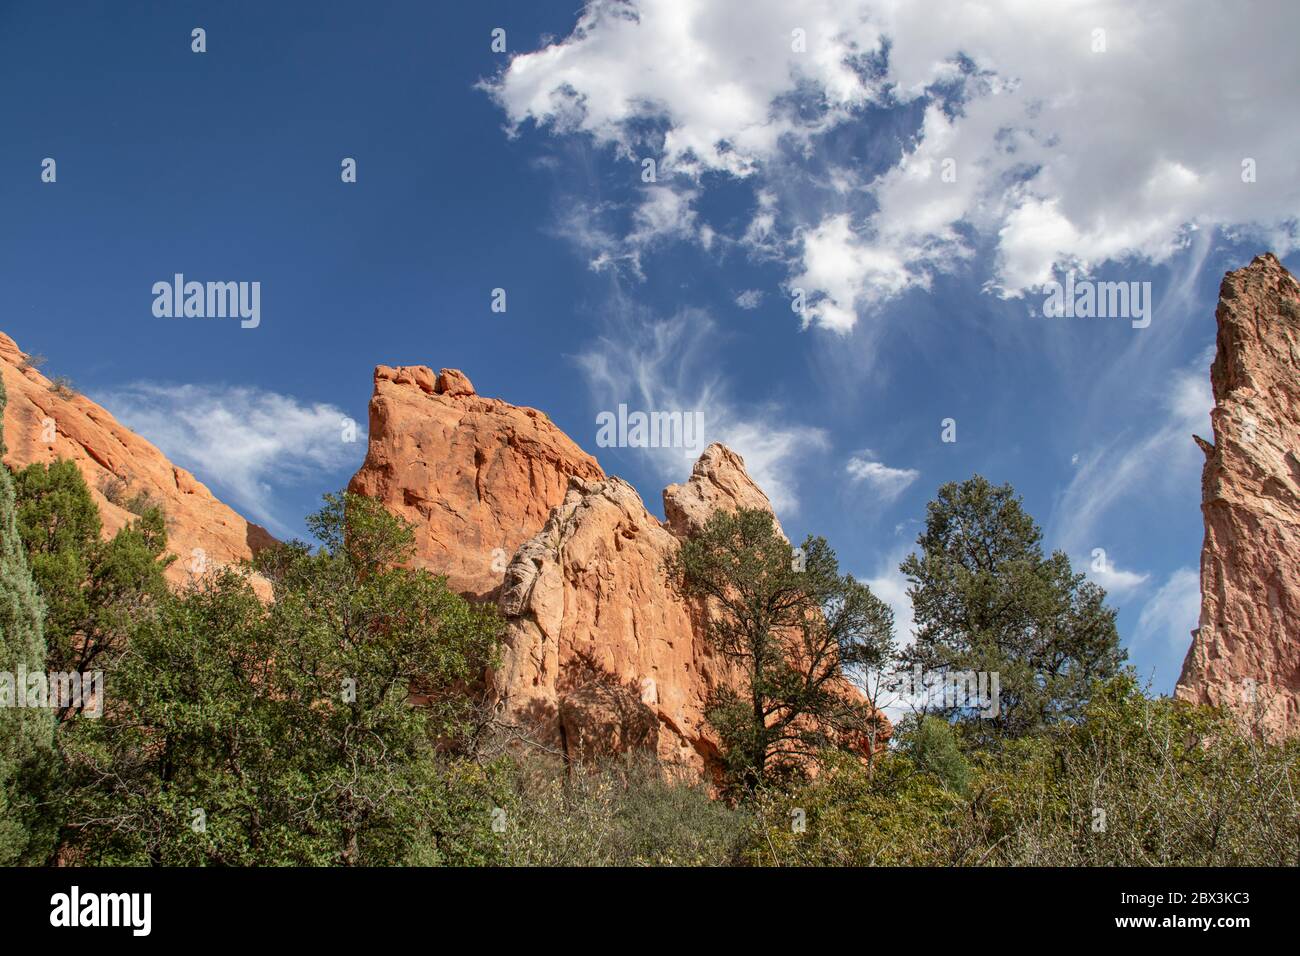 Huge red rocks jutting out of the ground from among the trees beneath a dramatic blue sky with clouds in Garden of the Gods near Colorado Springs USA. Stock Photo